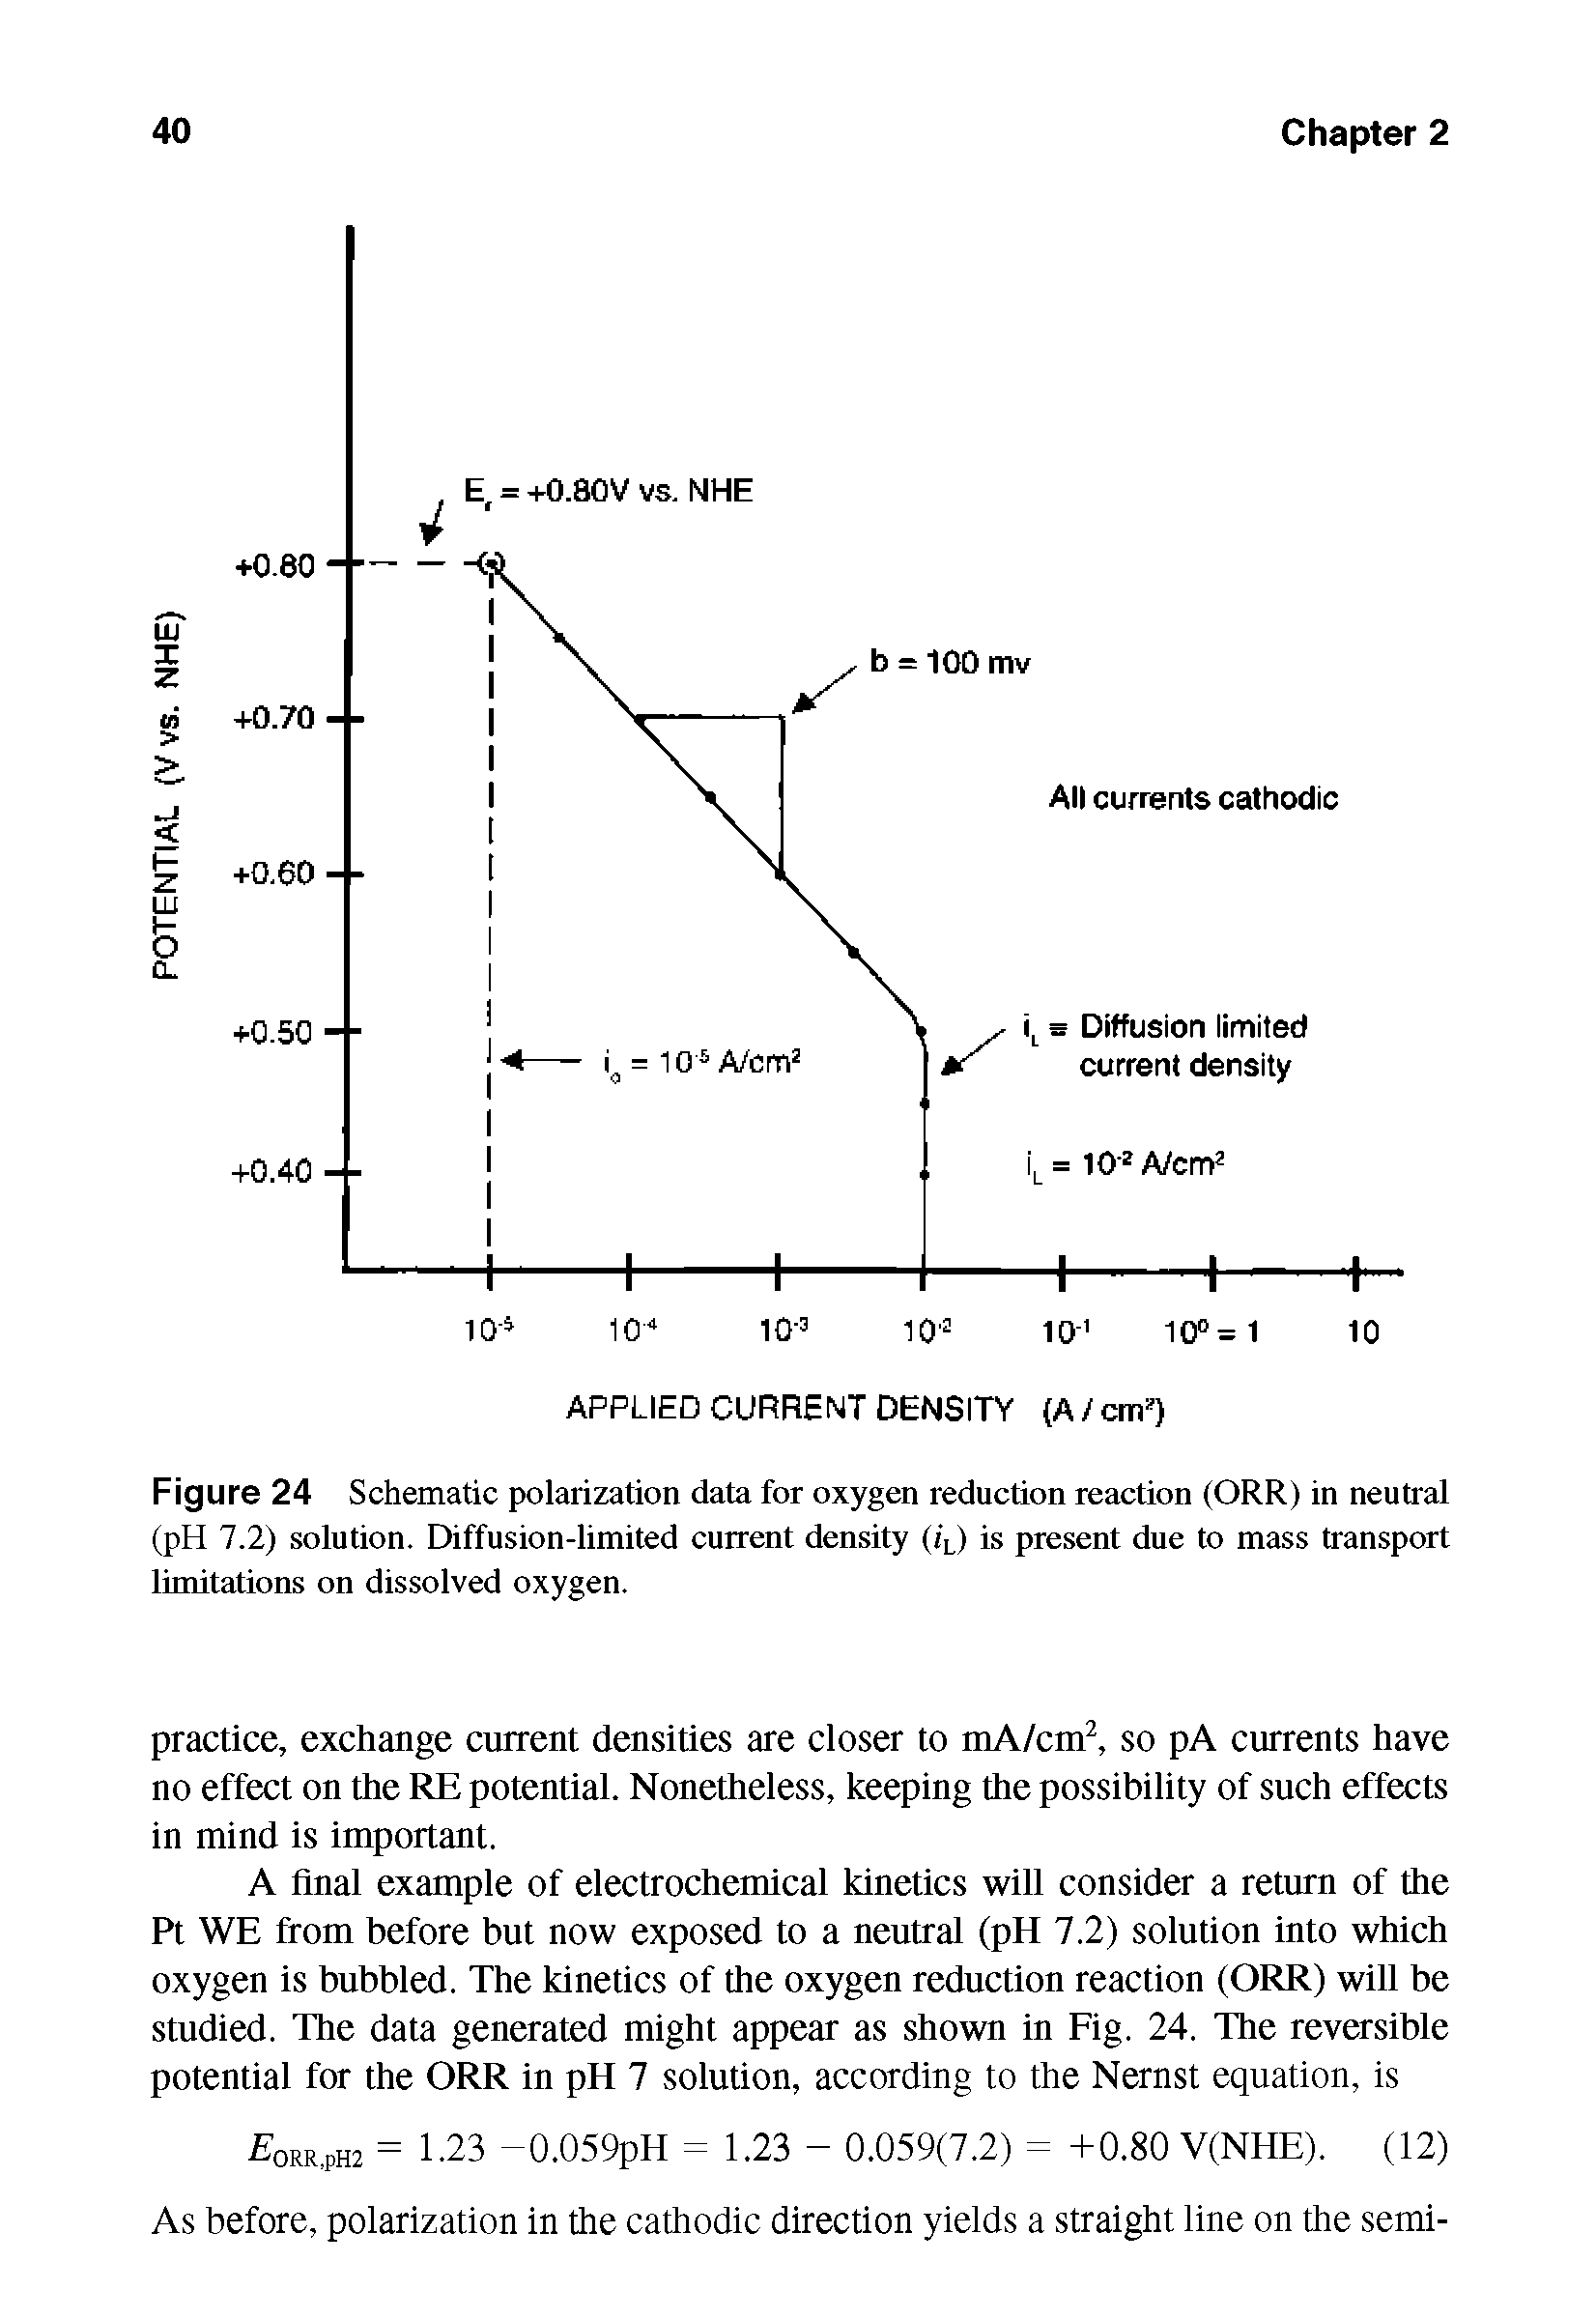 Figure 24 Schematic polarization data for oxygen reduction reaction (ORR) in neutral (pH 7.2) solution. Diffusion-limited current density (i L) is present due to mass transport limitations on dissolved oxygen.